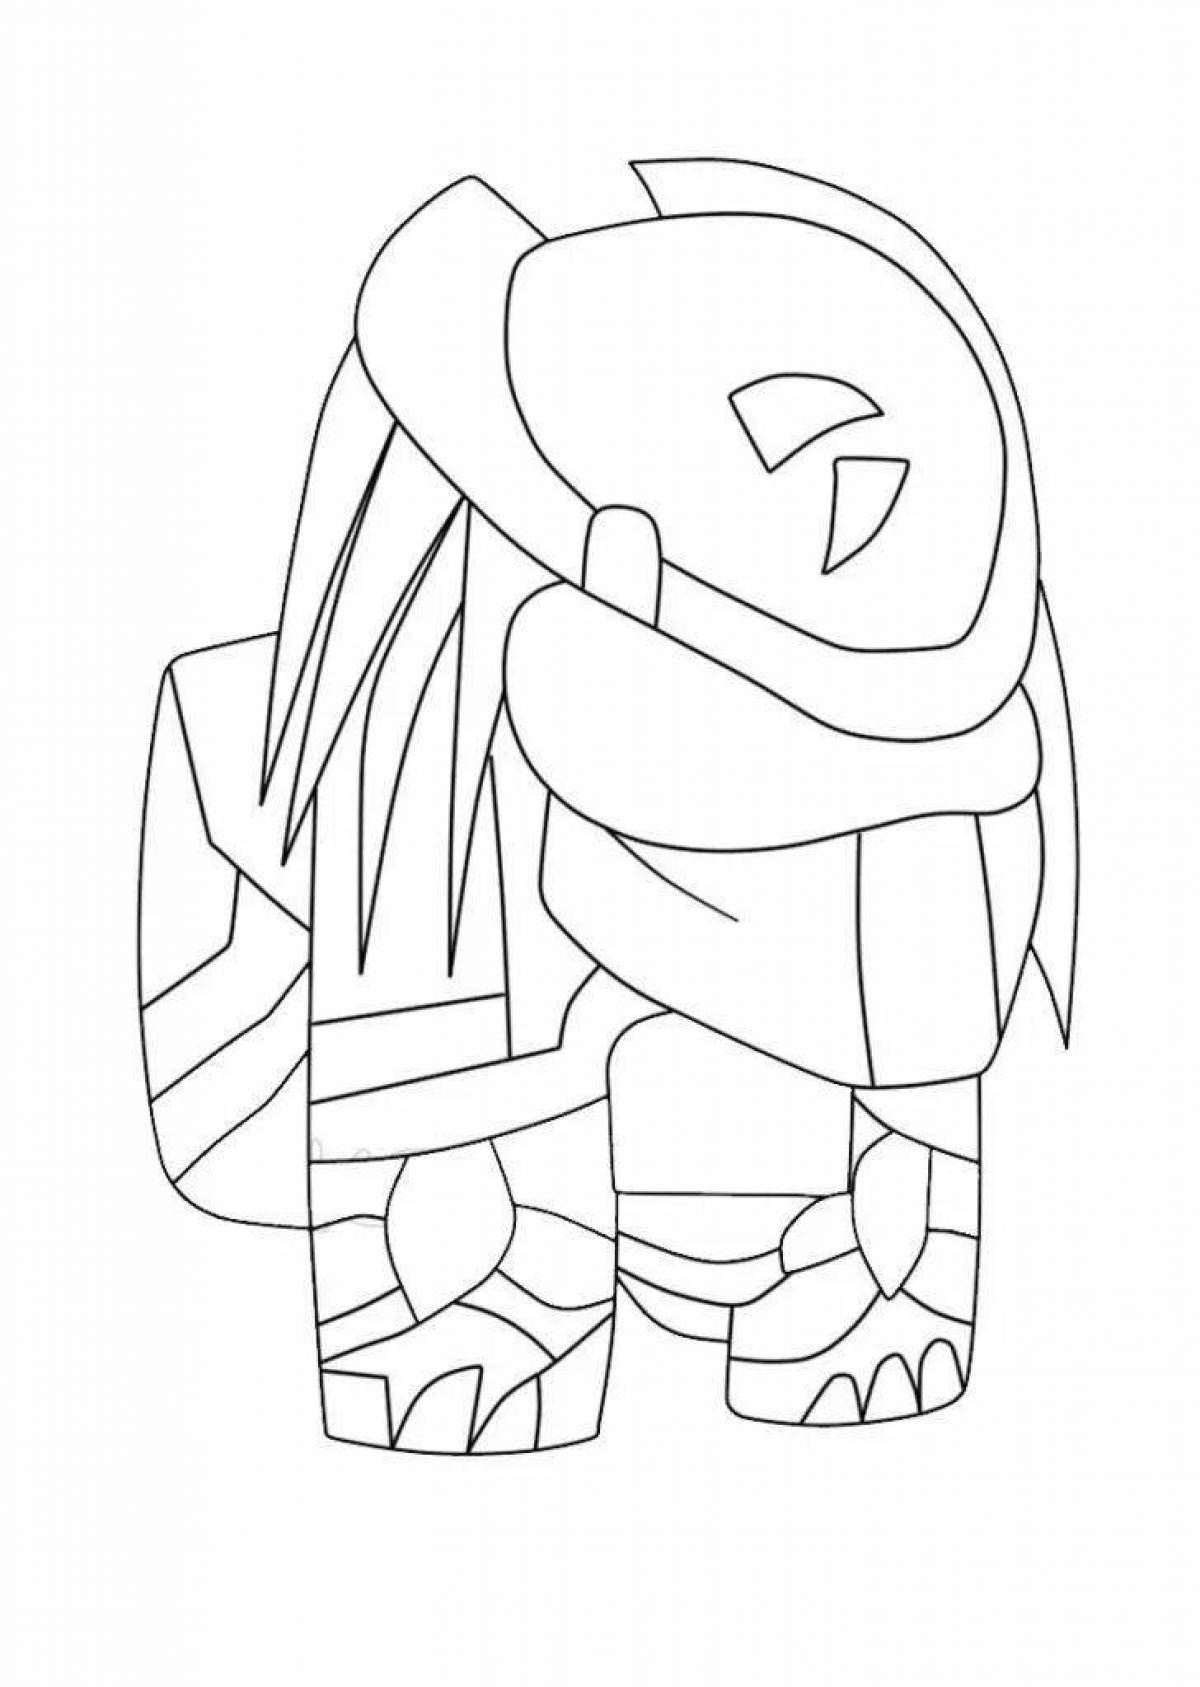 Adorable ace coloring pages for boys